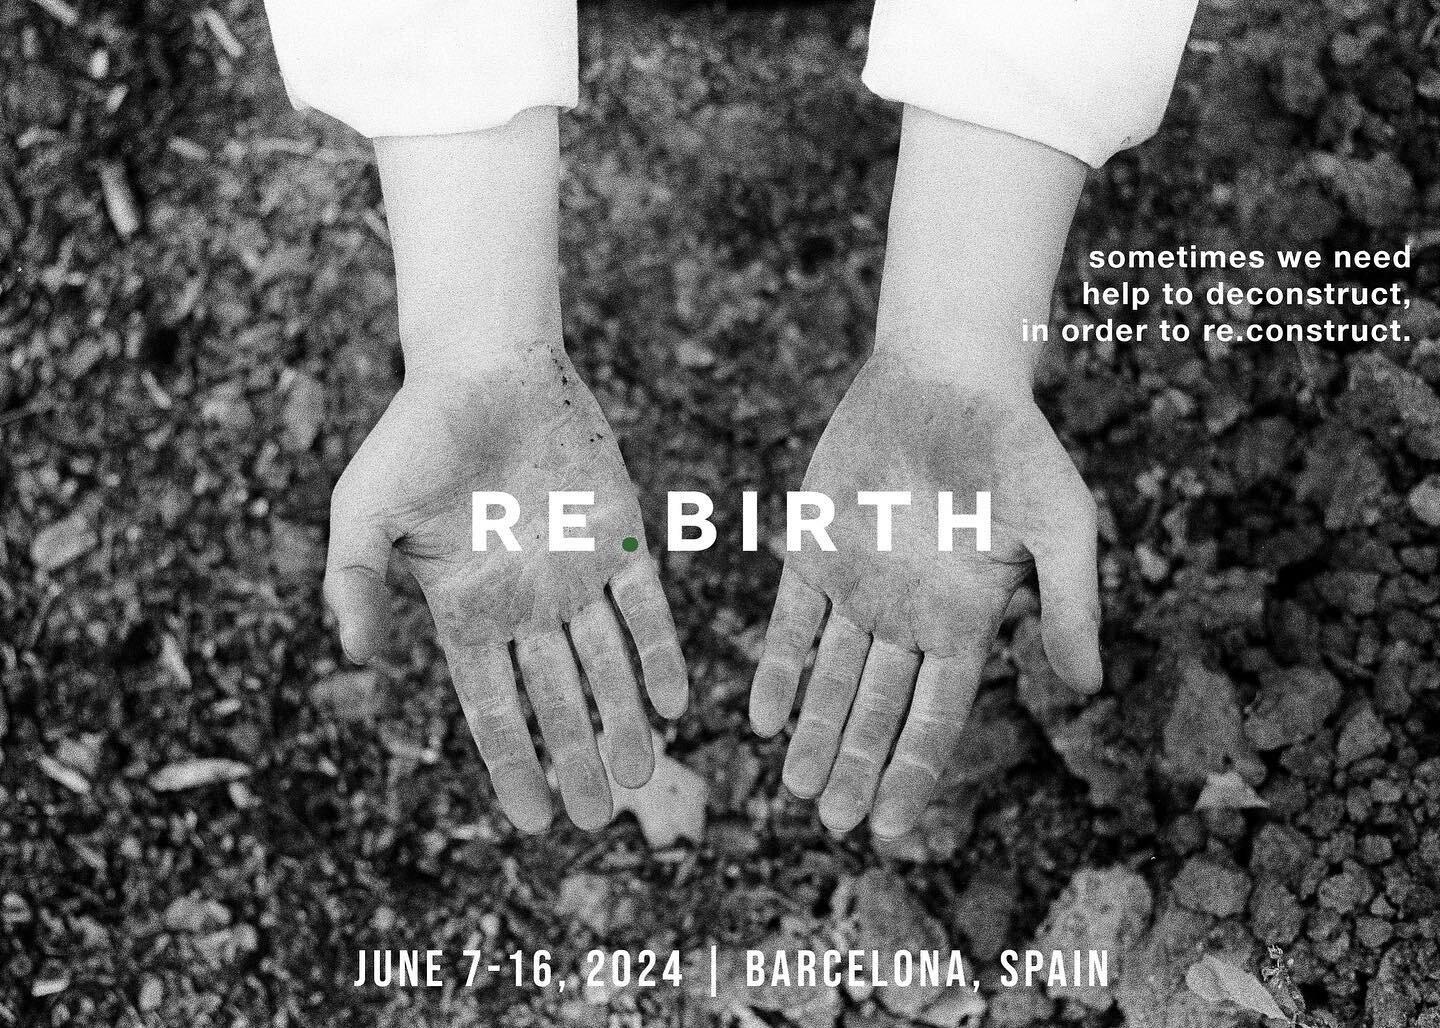 RE.BIRTH | an invitation beyond tradition into the revolution of Jesus 
JUNE 7- JUNE 16, 2024
BARCELONA, SPAIN

Christianity seems to be crumbling for many people, often due to an unhealthy conflation of culture with Jesus. More and more these days, 